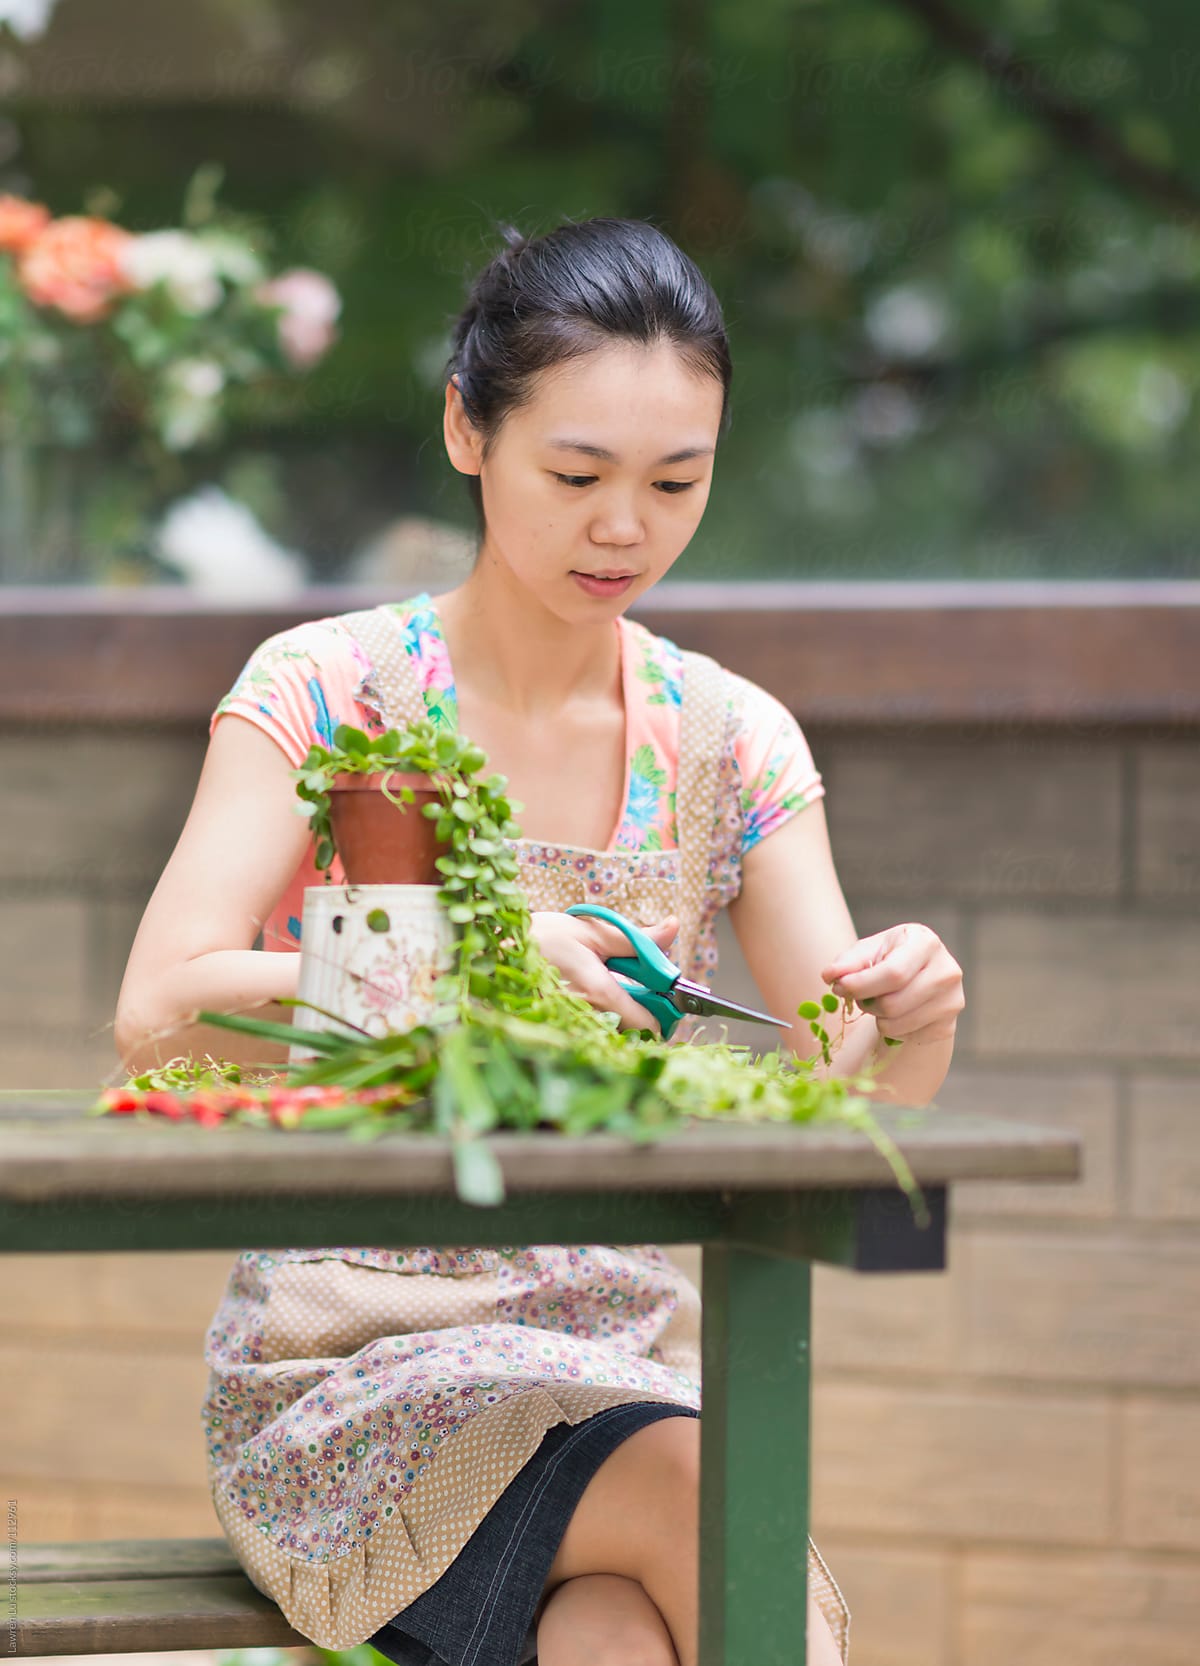 Young woman trimming plants in garden